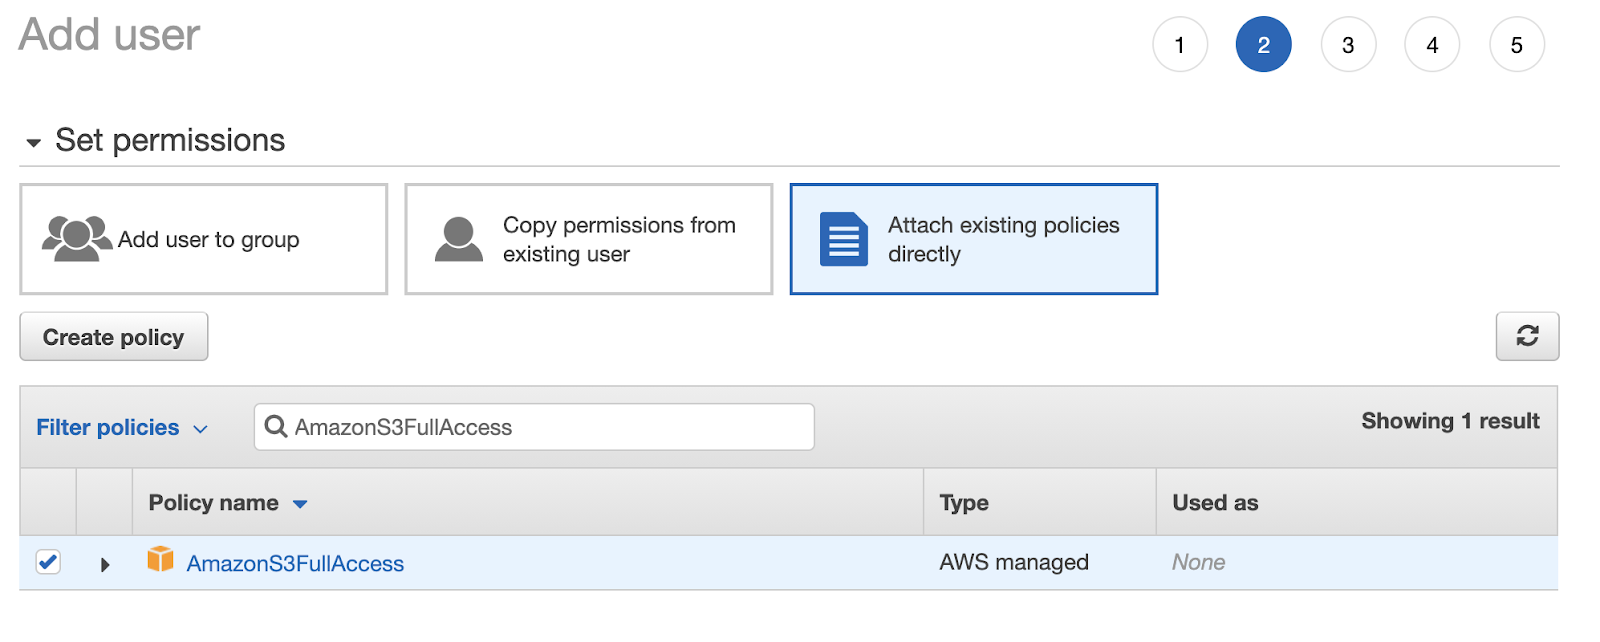 Settings page to Set permissions for the newly created IAM user with policy name AmazonS3FullAccess